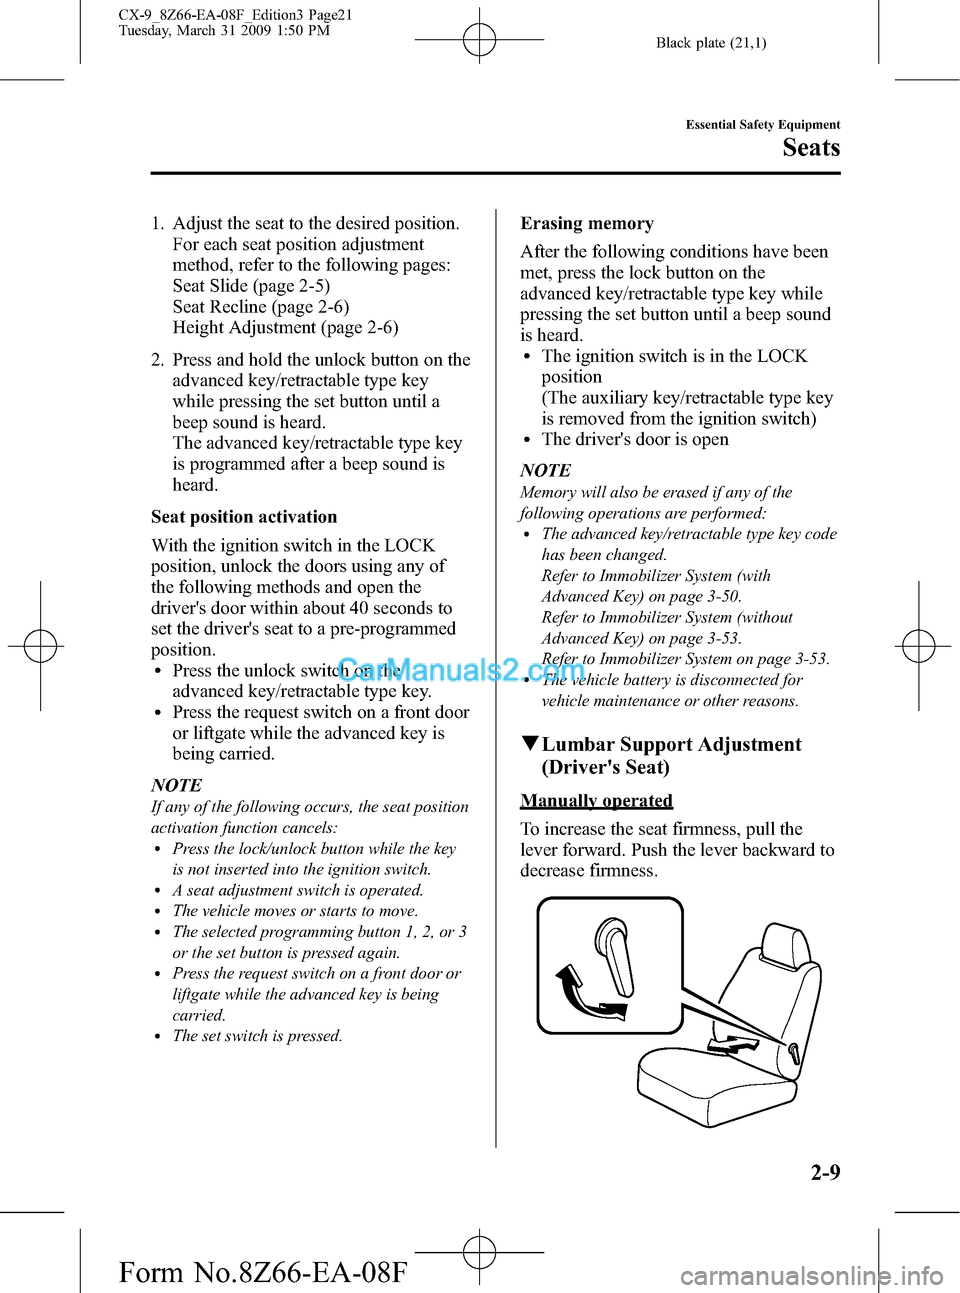 MAZDA MODEL CX-9 2009   (in English) Owners Manual Black plate (21,1)
1. Adjust the seat to the desired position.
For each seat position adjustment
method, refer to the following pages:
Seat Slide (page 2-5)
Seat Recline (page 2-6)
Height Adjustment (